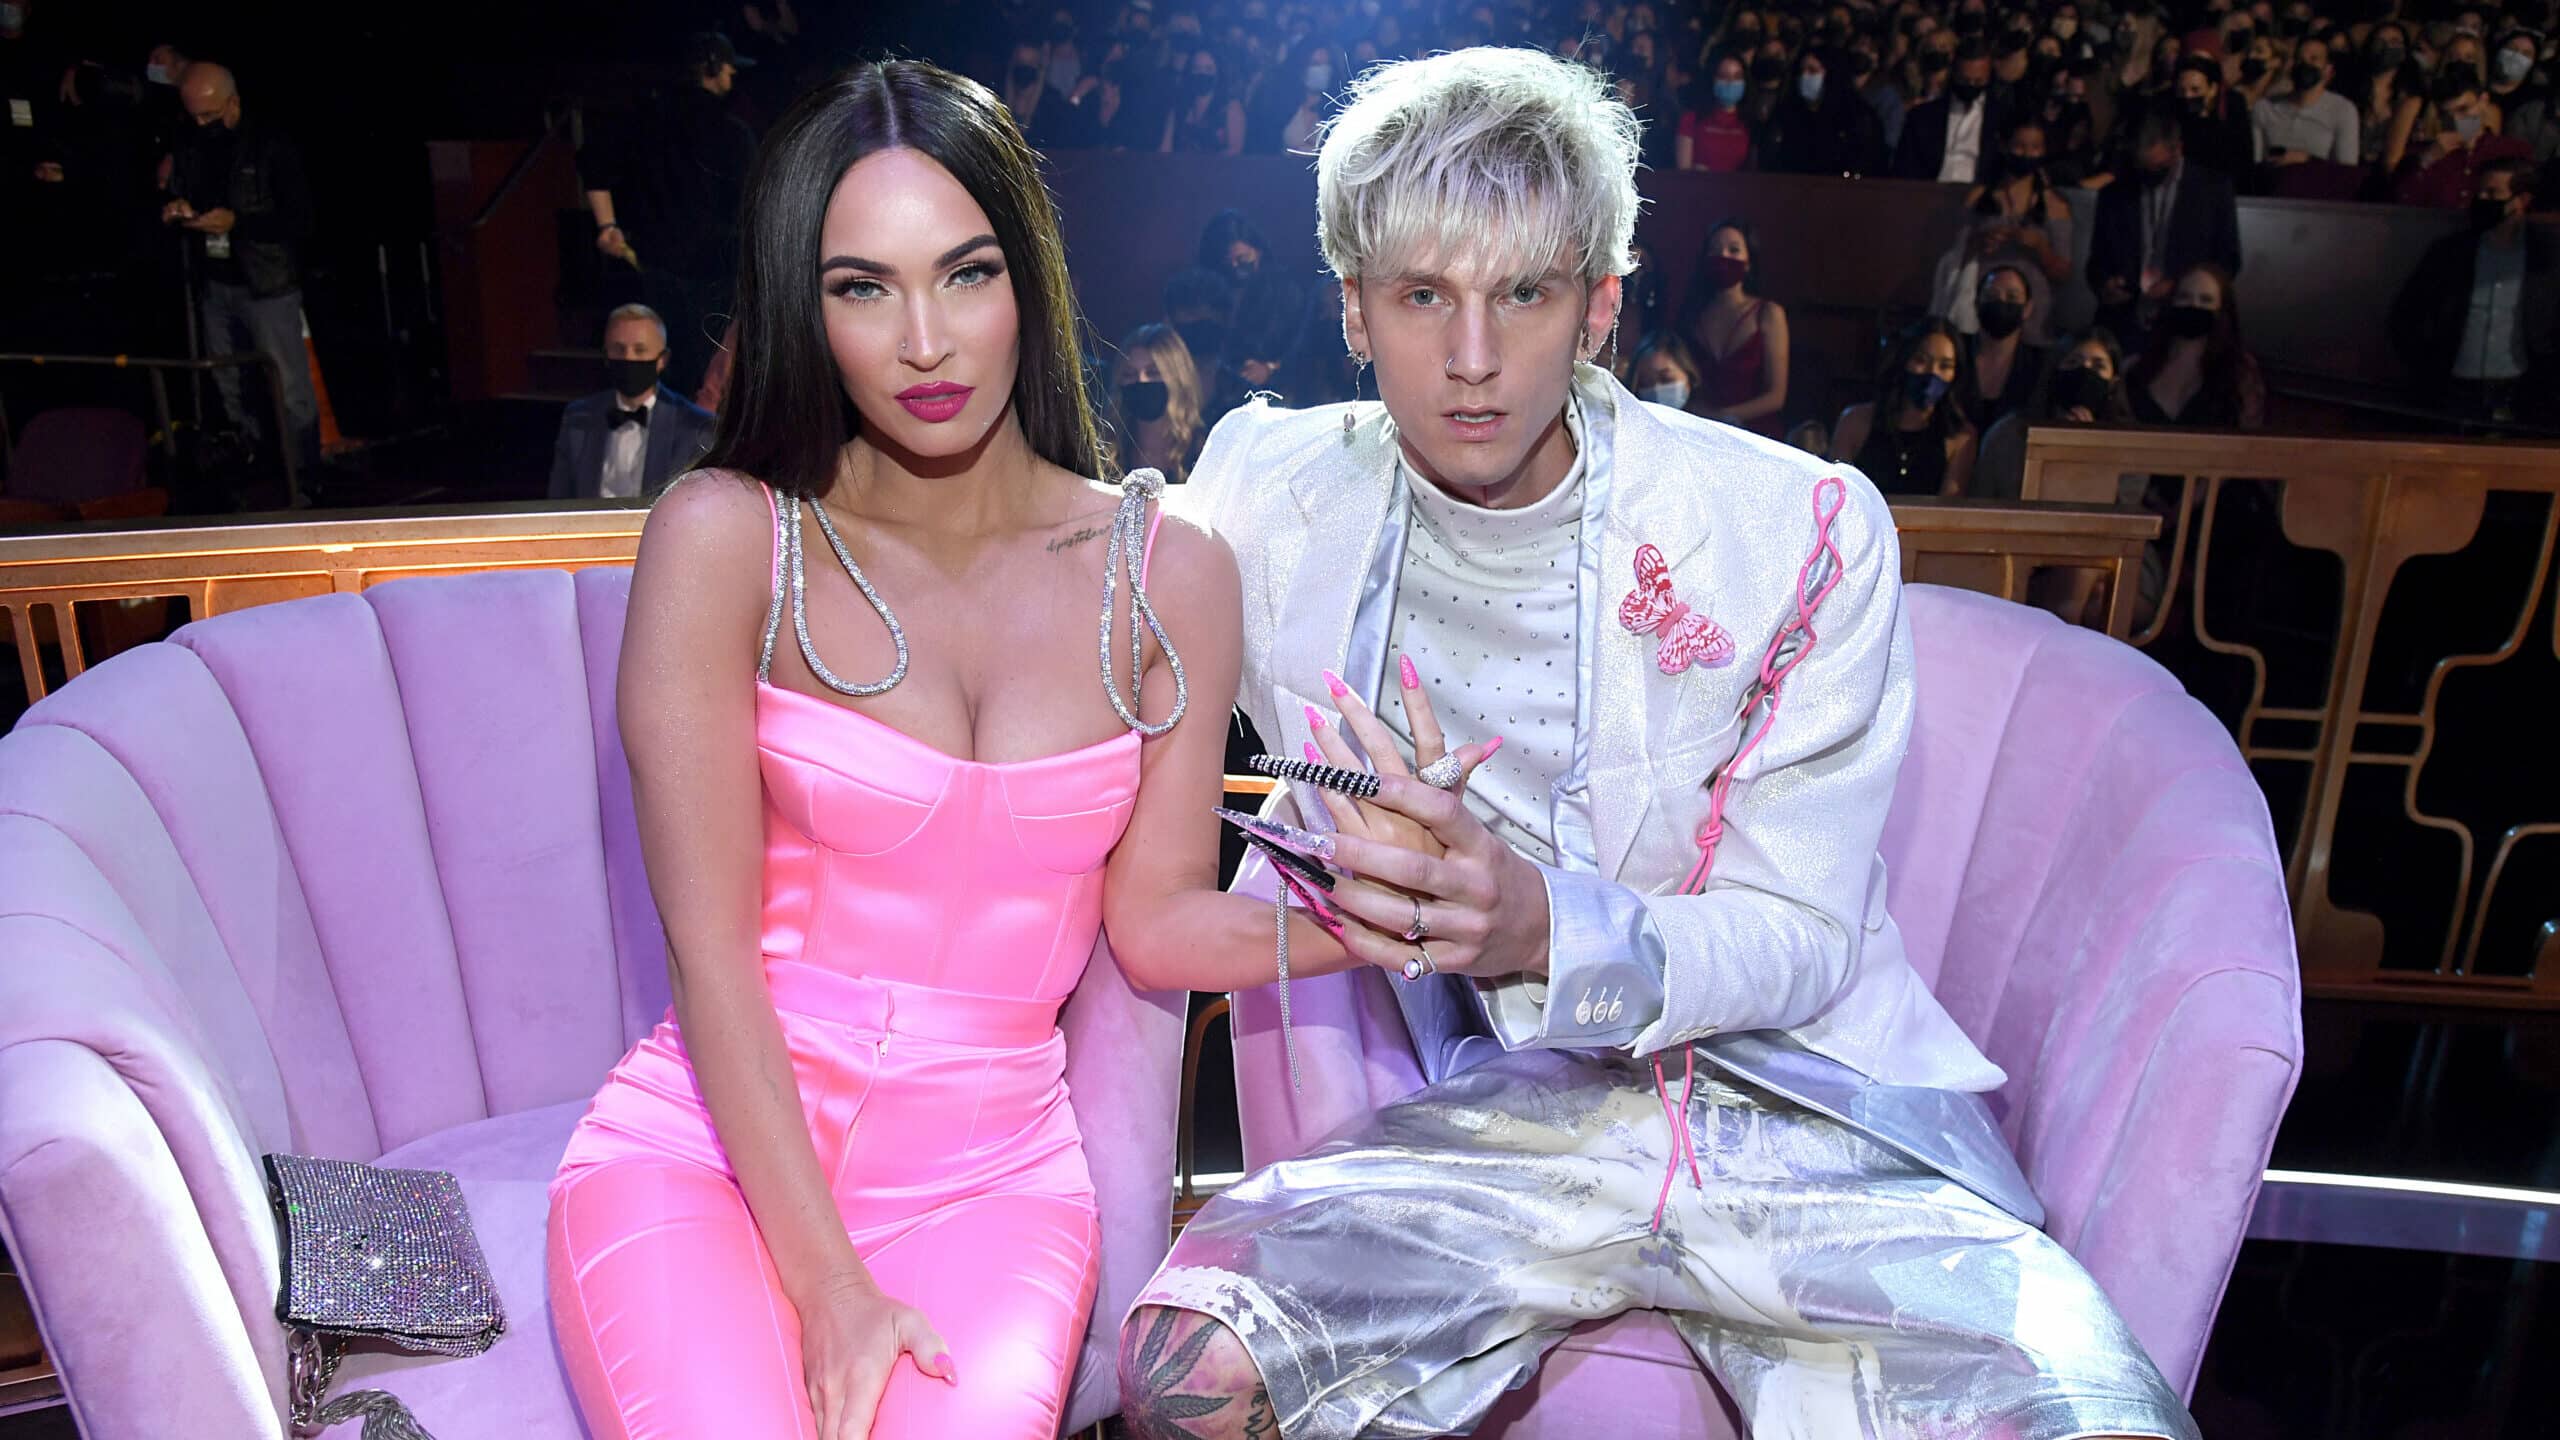 Megan Fox and Machine Gun Kelly attend the 2021 iHeartRadio Music Awards at The Dolby Theatre in Los Angeles, California, which was broadcast live on FOX on May 27, 2021.